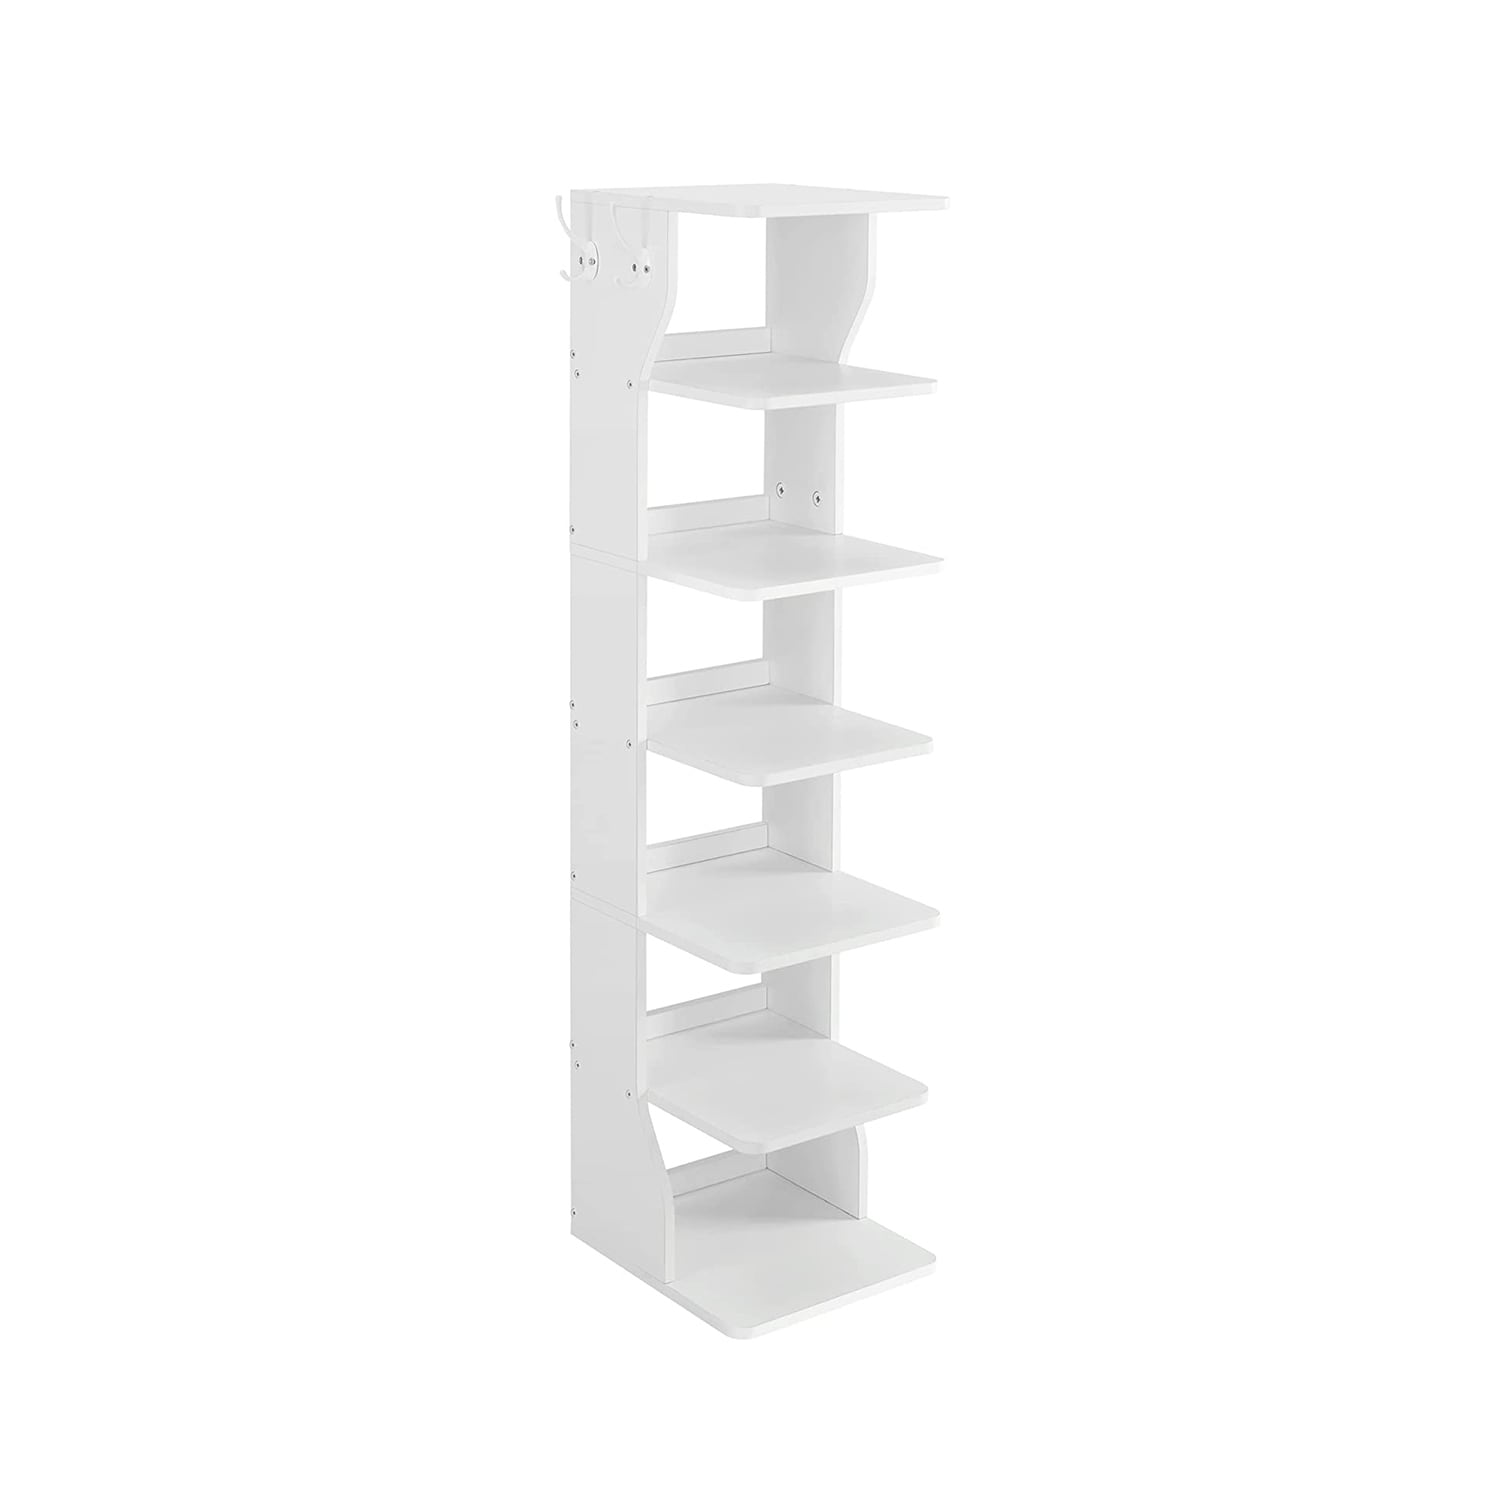 https://ak1.ostkcdn.com/images/products/is/images/direct/d858c89d8a3ec7f295114d4cef6d819c45bd2904/6-Tier-Slim-Shoe-Storage-Rack.jpg